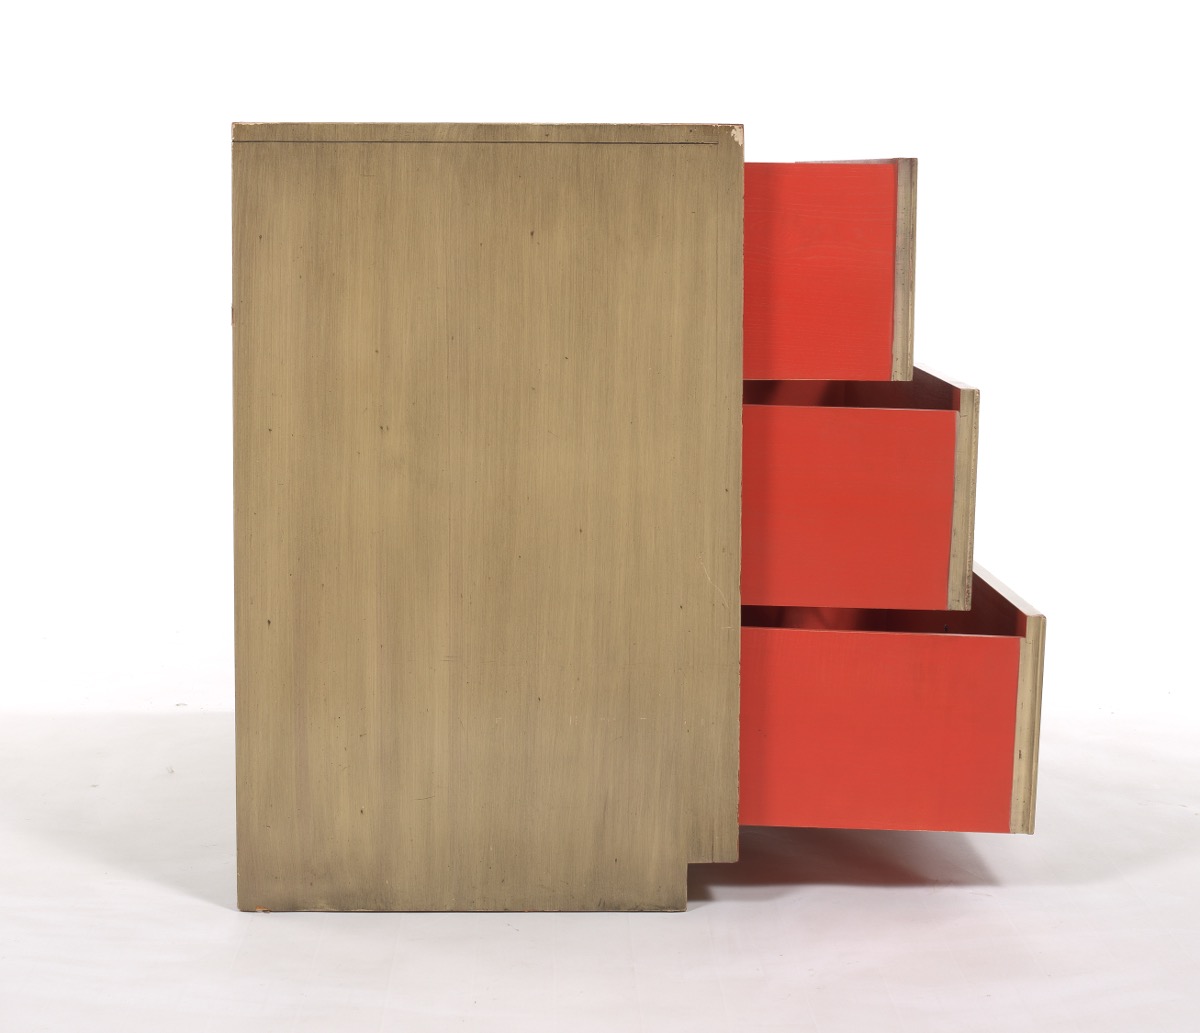 Dorothy Draper "Espana Bunching Chest" for Heritage, ca. 1950s - Image 4 of 8